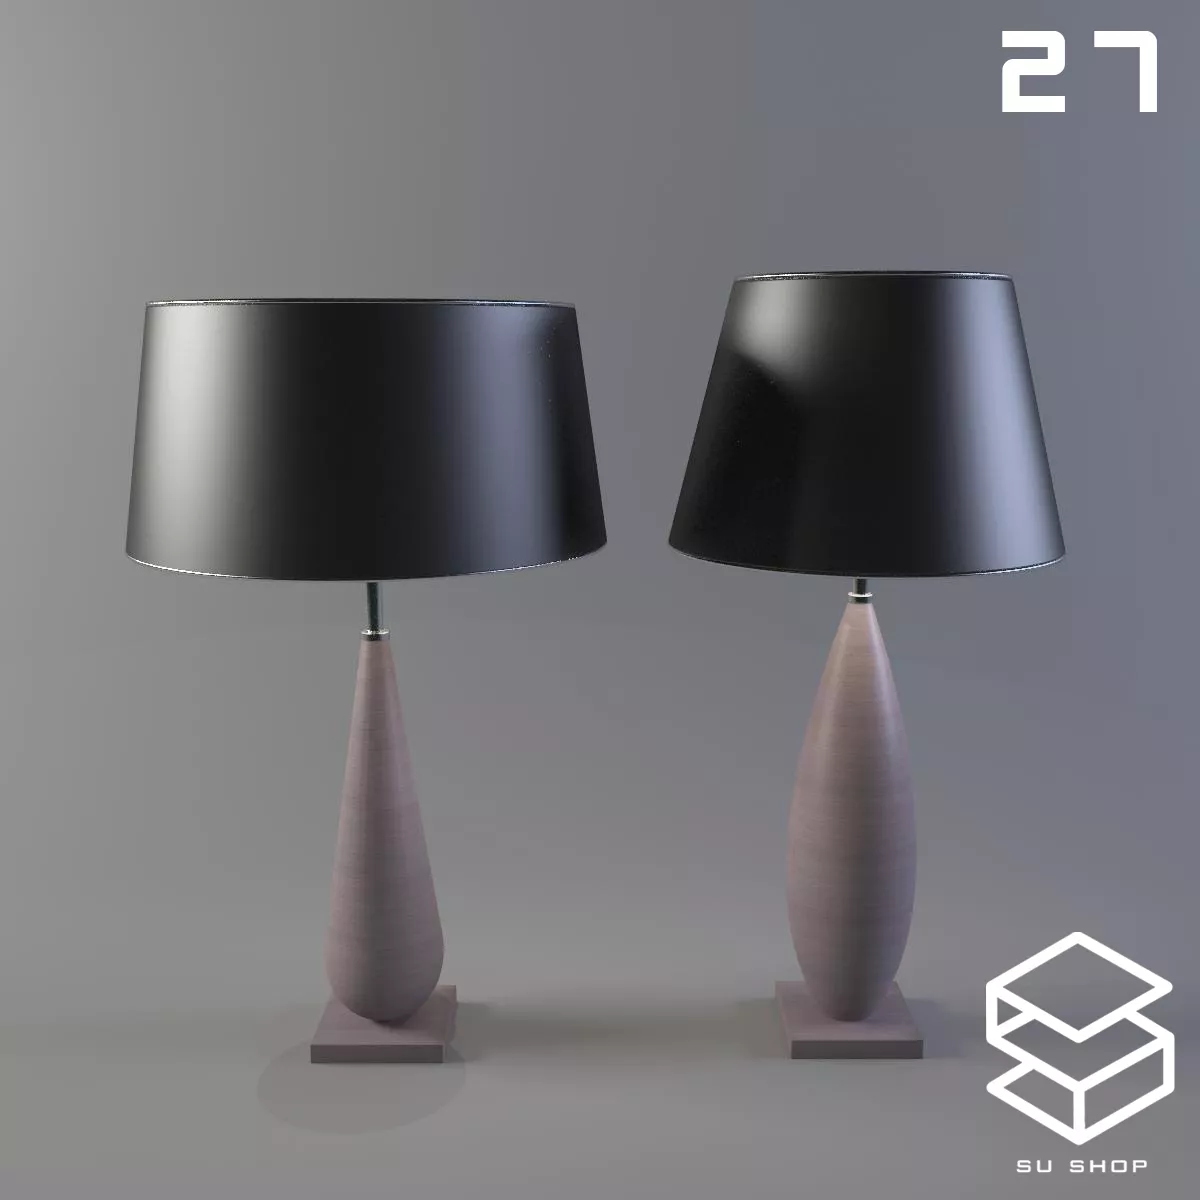 MODERN TABLE LAMP - SKETCHUP 3D MODEL - VRAY OR ENSCAPE - ID14819